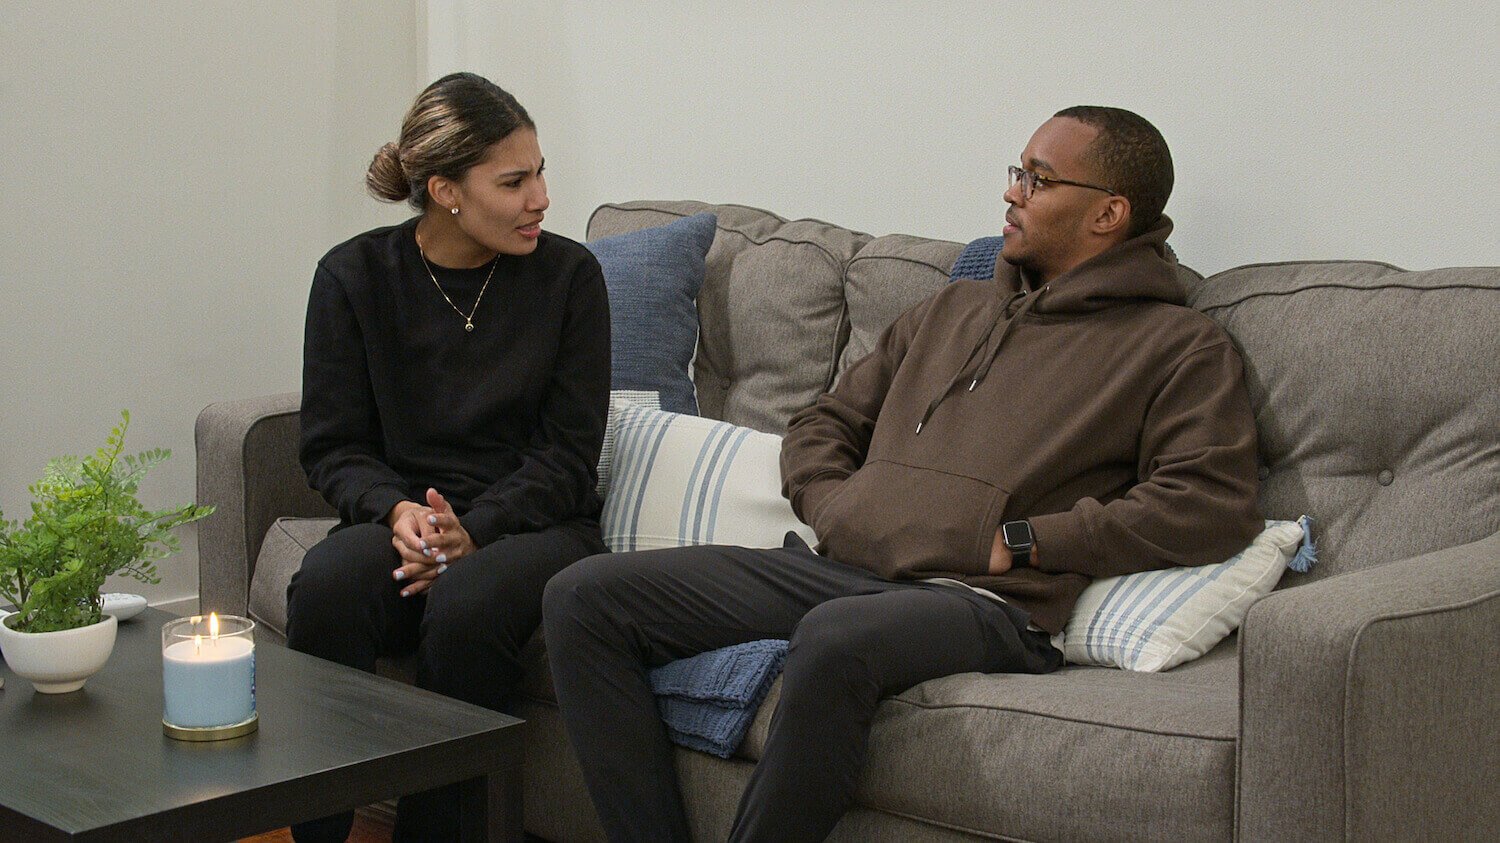 'Love Is Blind' stars Marshall and JAckie sit on a gray couch together while having a conversation.